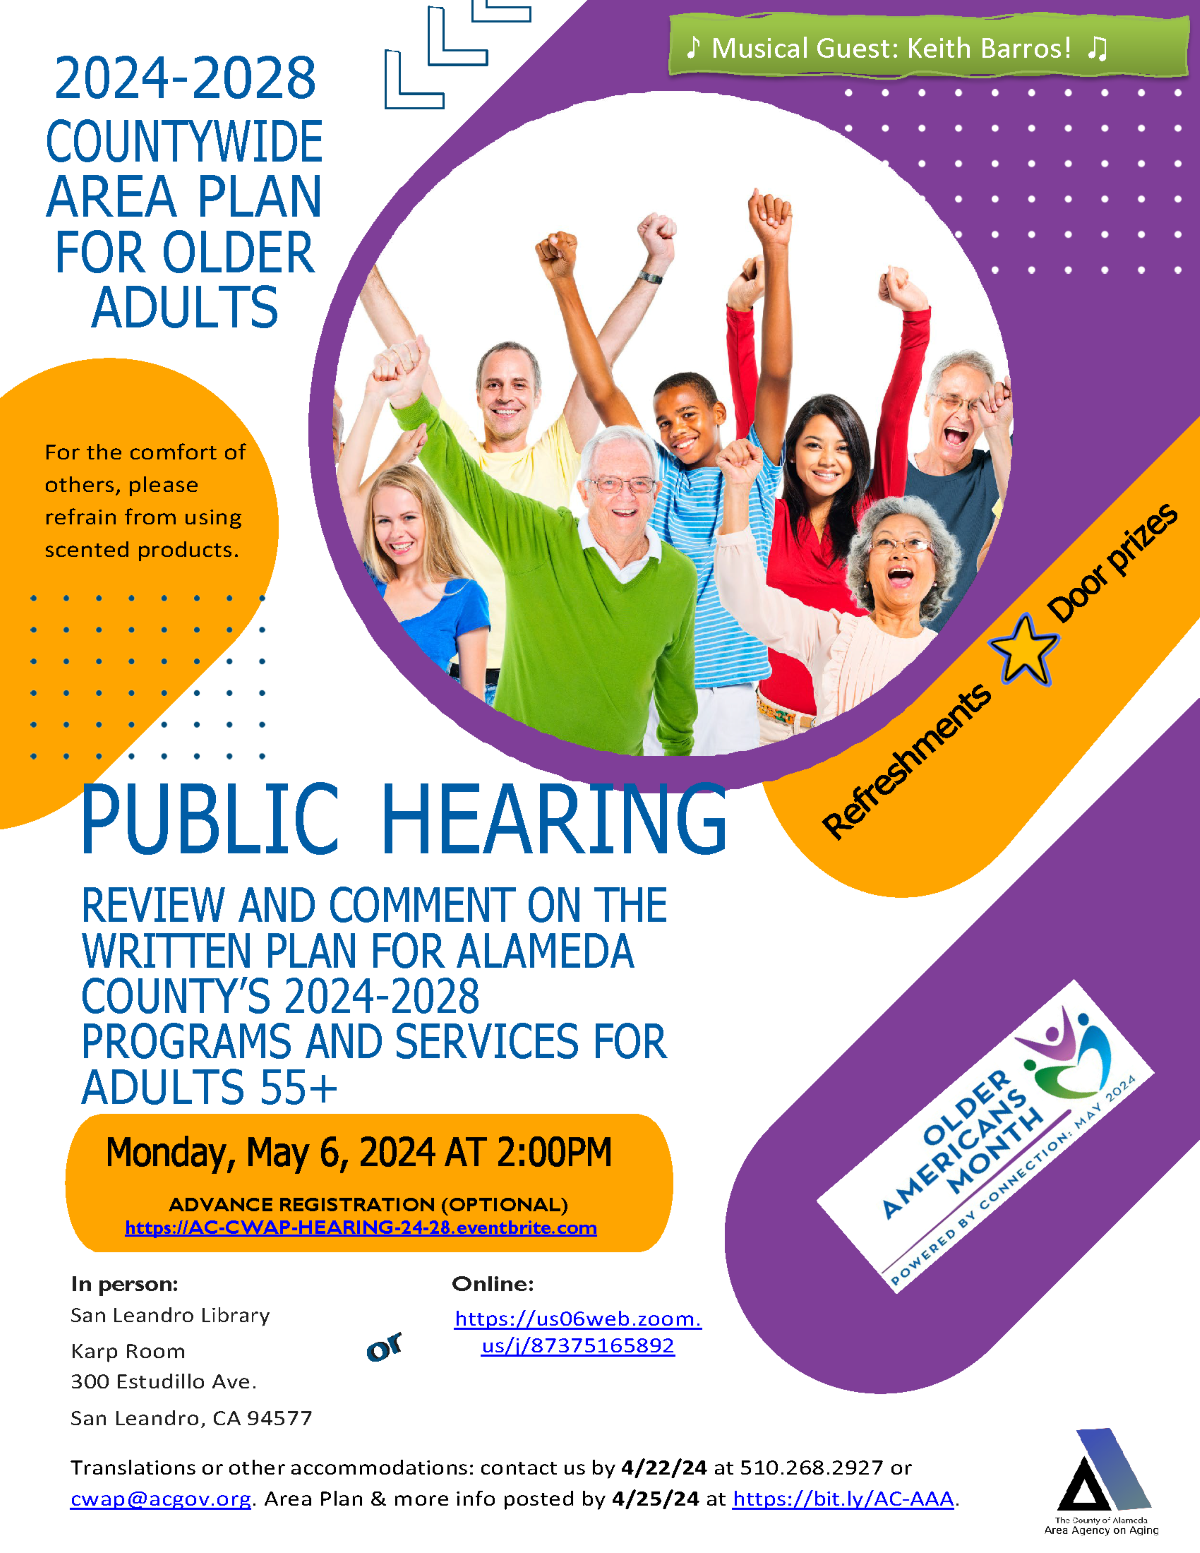 Public Hearing: 2024-2028 Countywide Area Plan for Older Adults